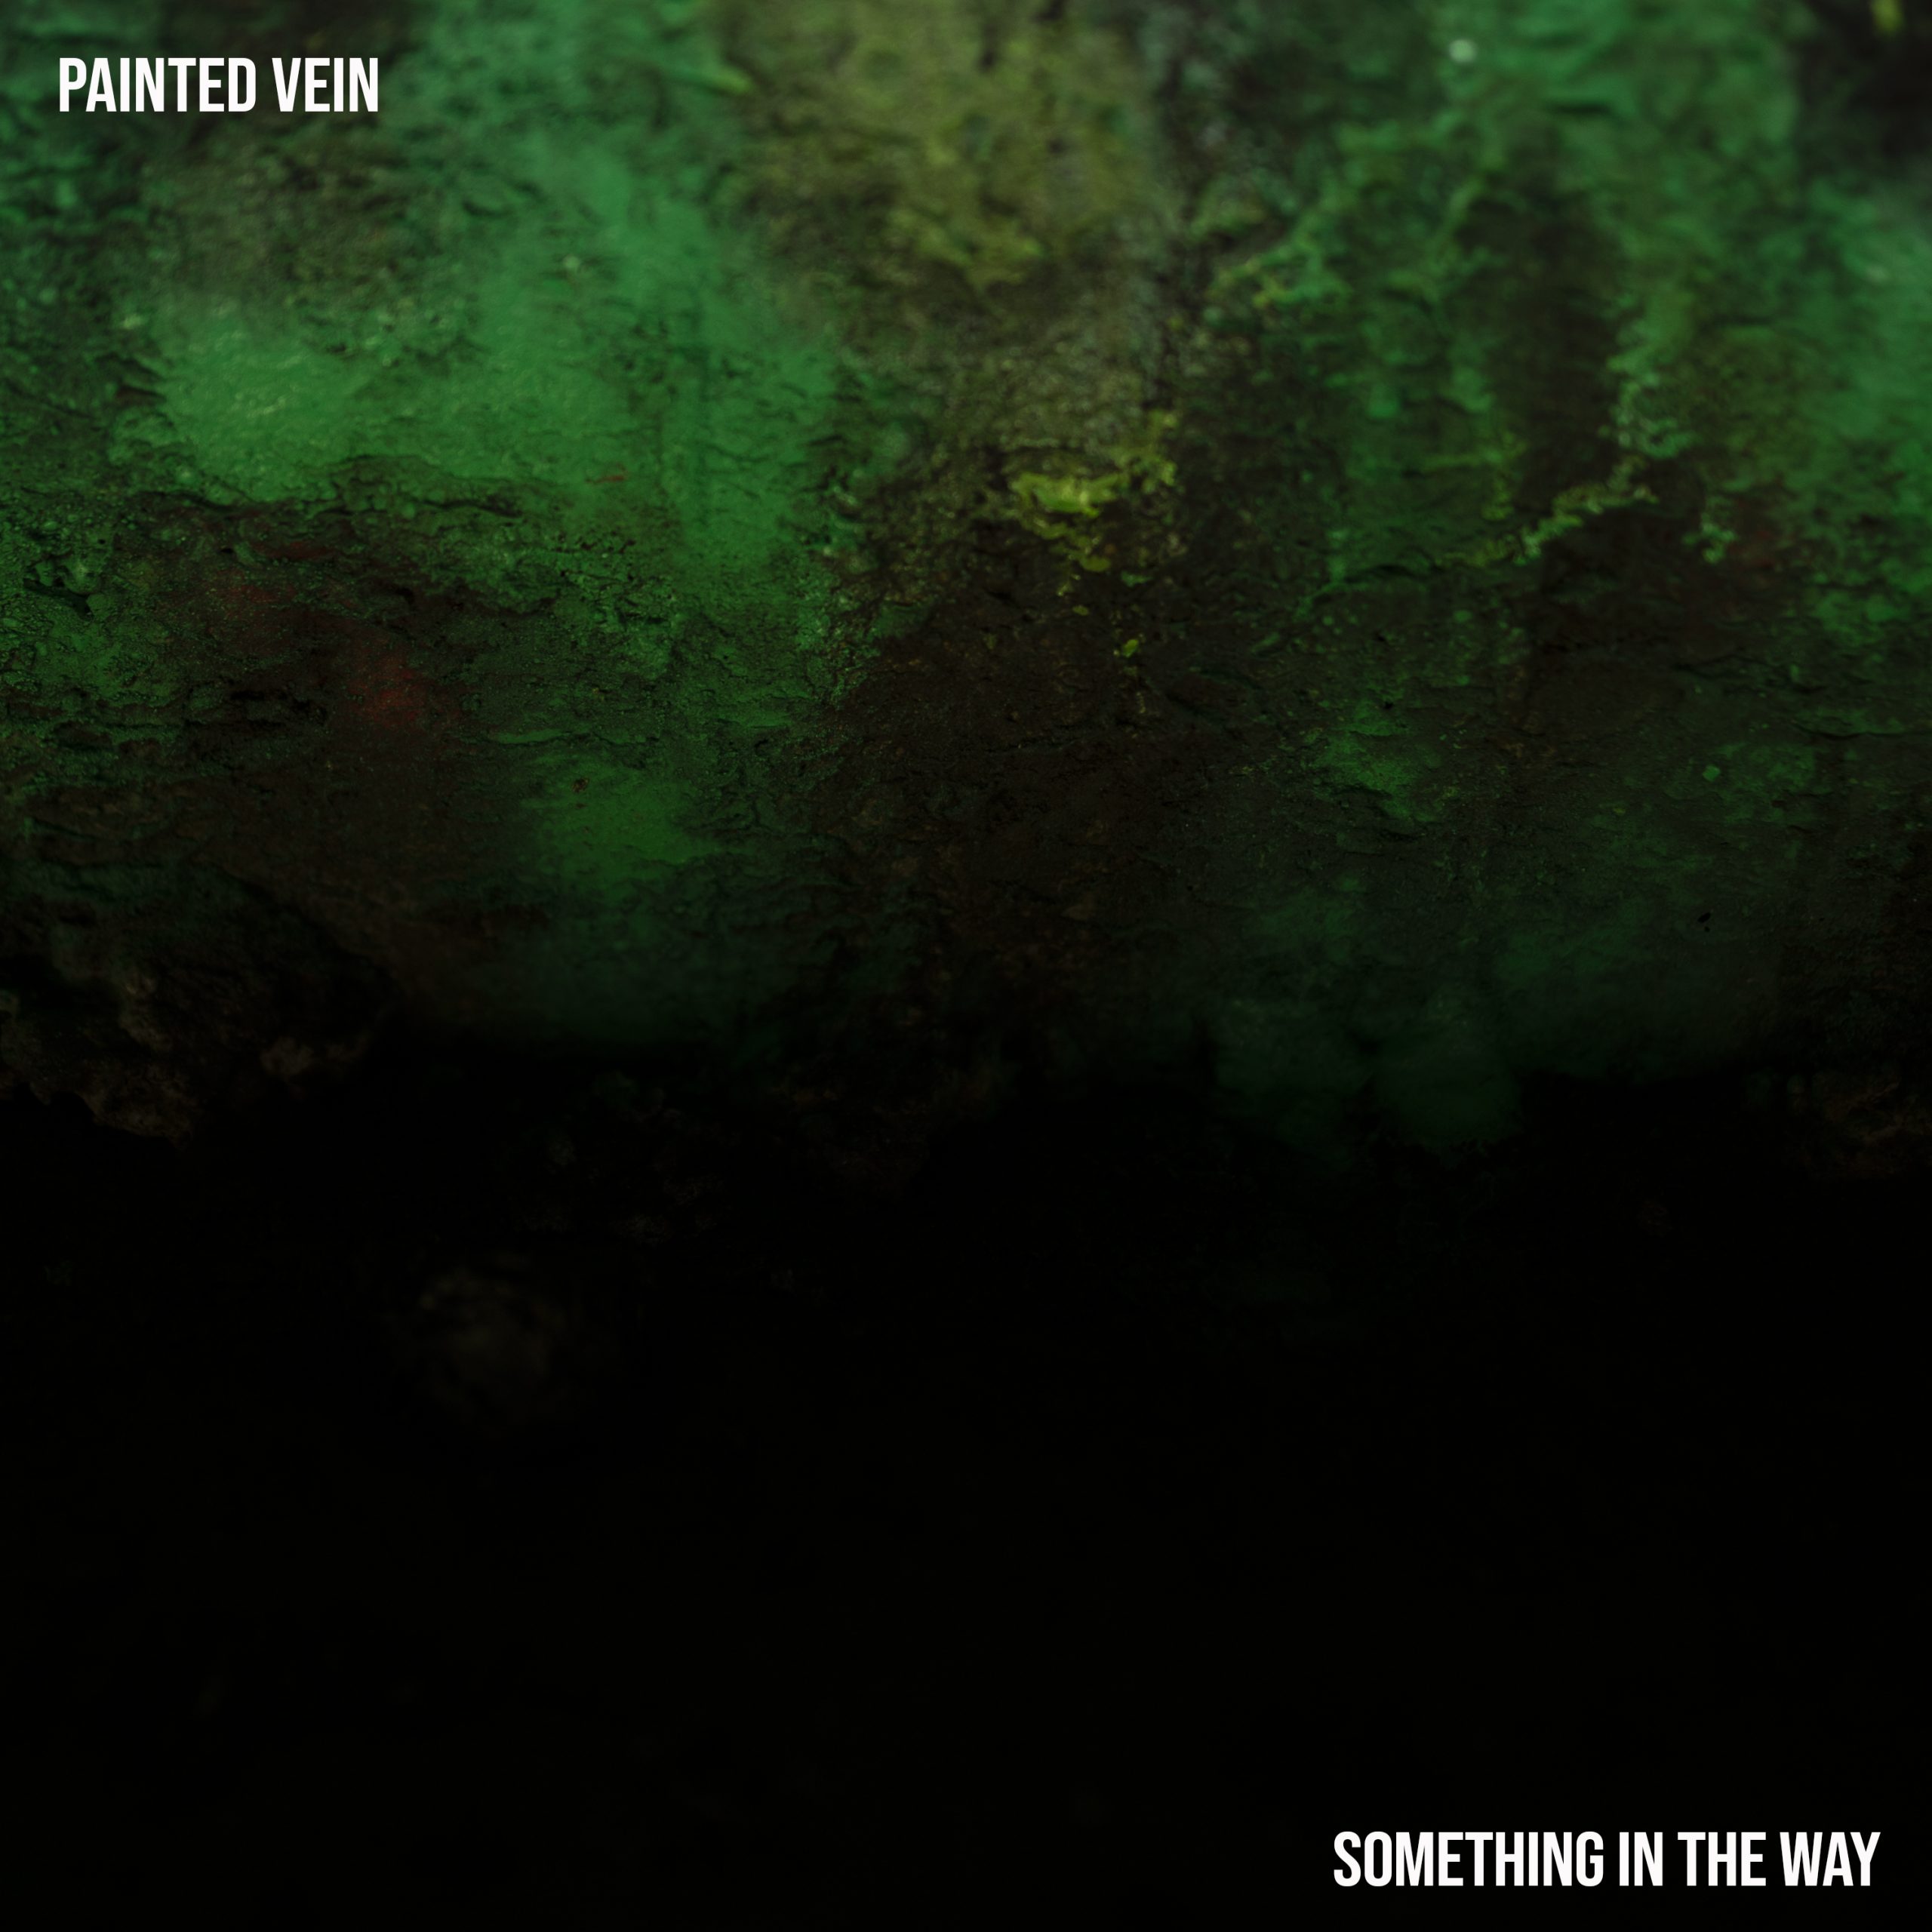 Painted Vein Debuts Video for Haunting Shoegaze Cover of Nirvana’s “Something In The Way”